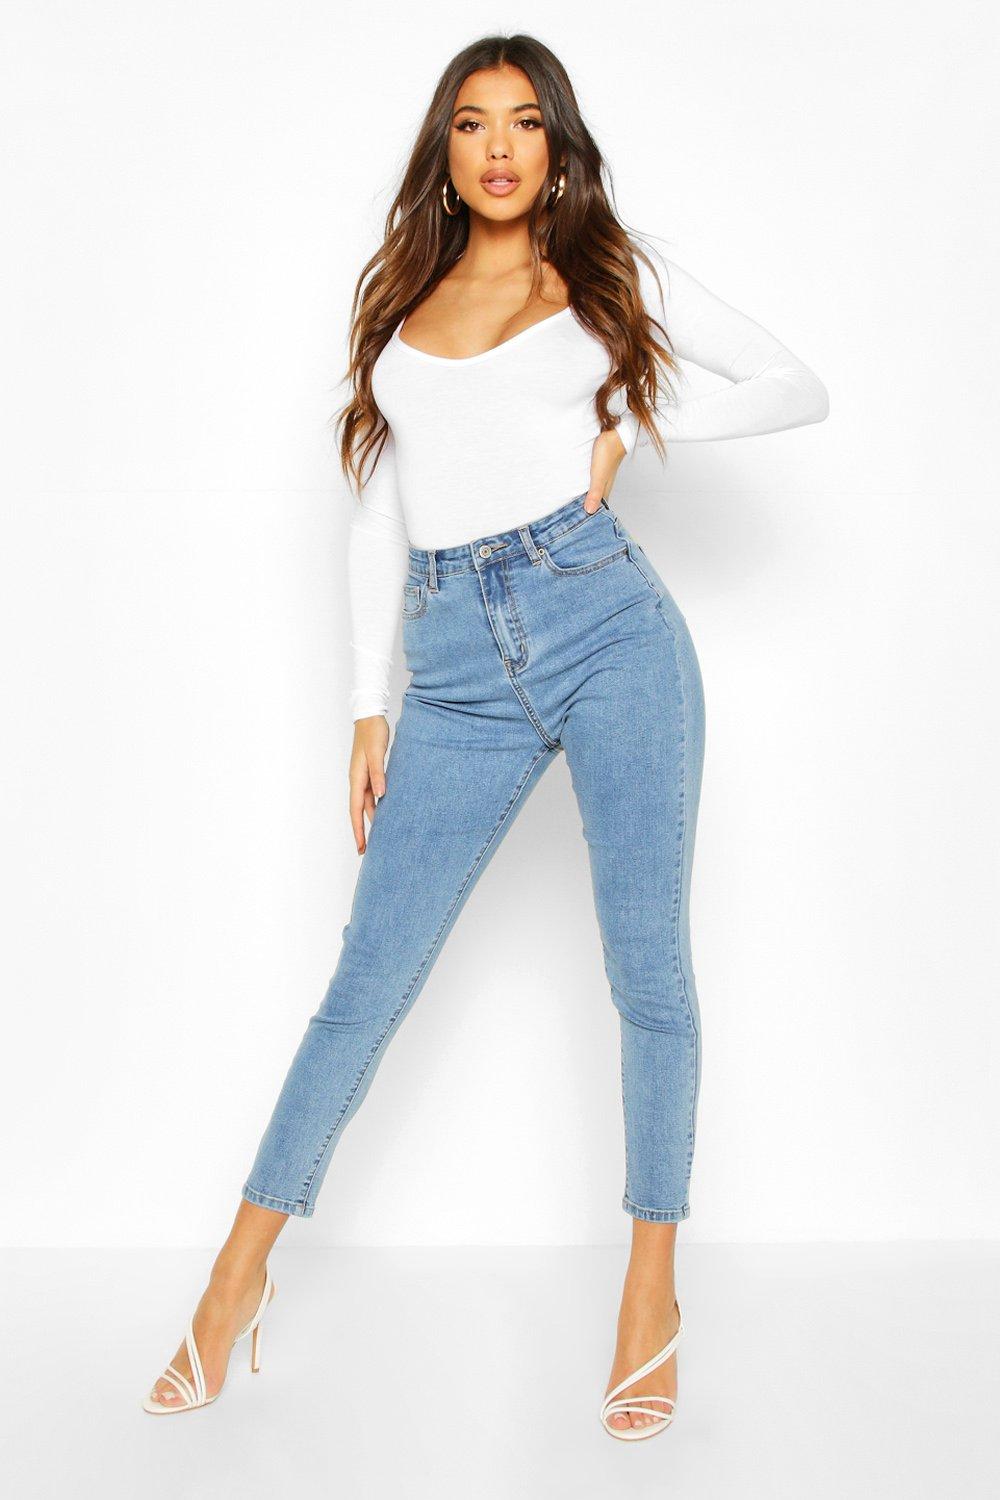 boohoo ripped jeans